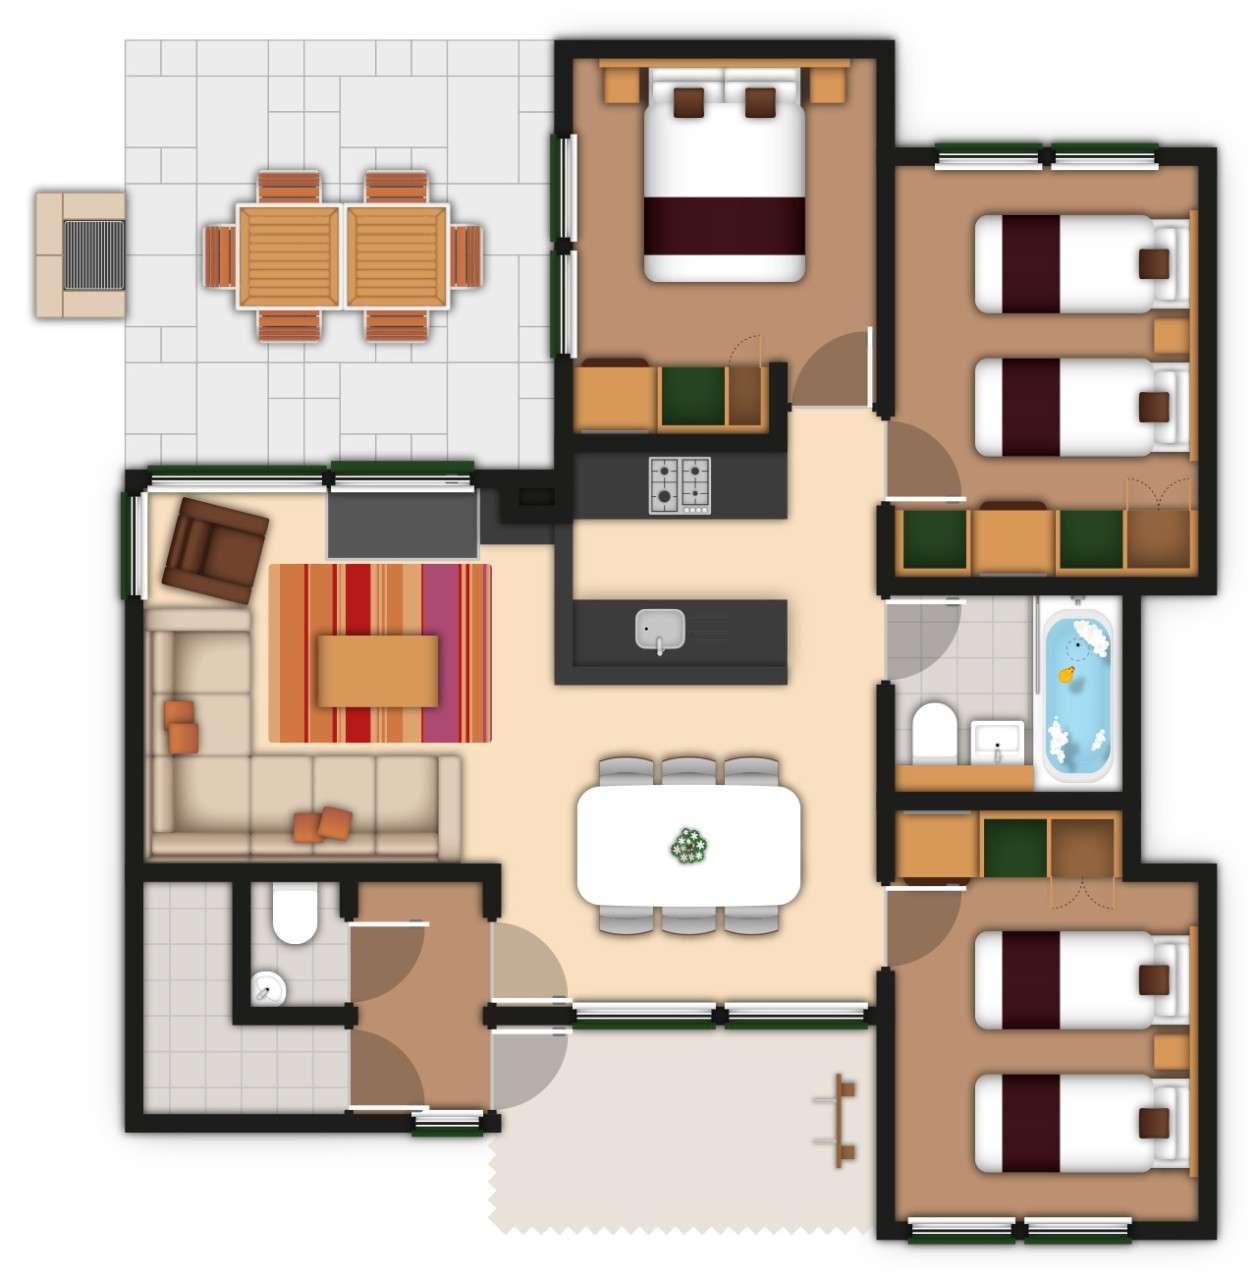 A detailed lodge floor plan illustration showing bedrooms, bathrooms, living area, kitchen and outdoor space. If you require further assistance viewing the floor plan or need further information on the accommodation type please contact Guest Services.